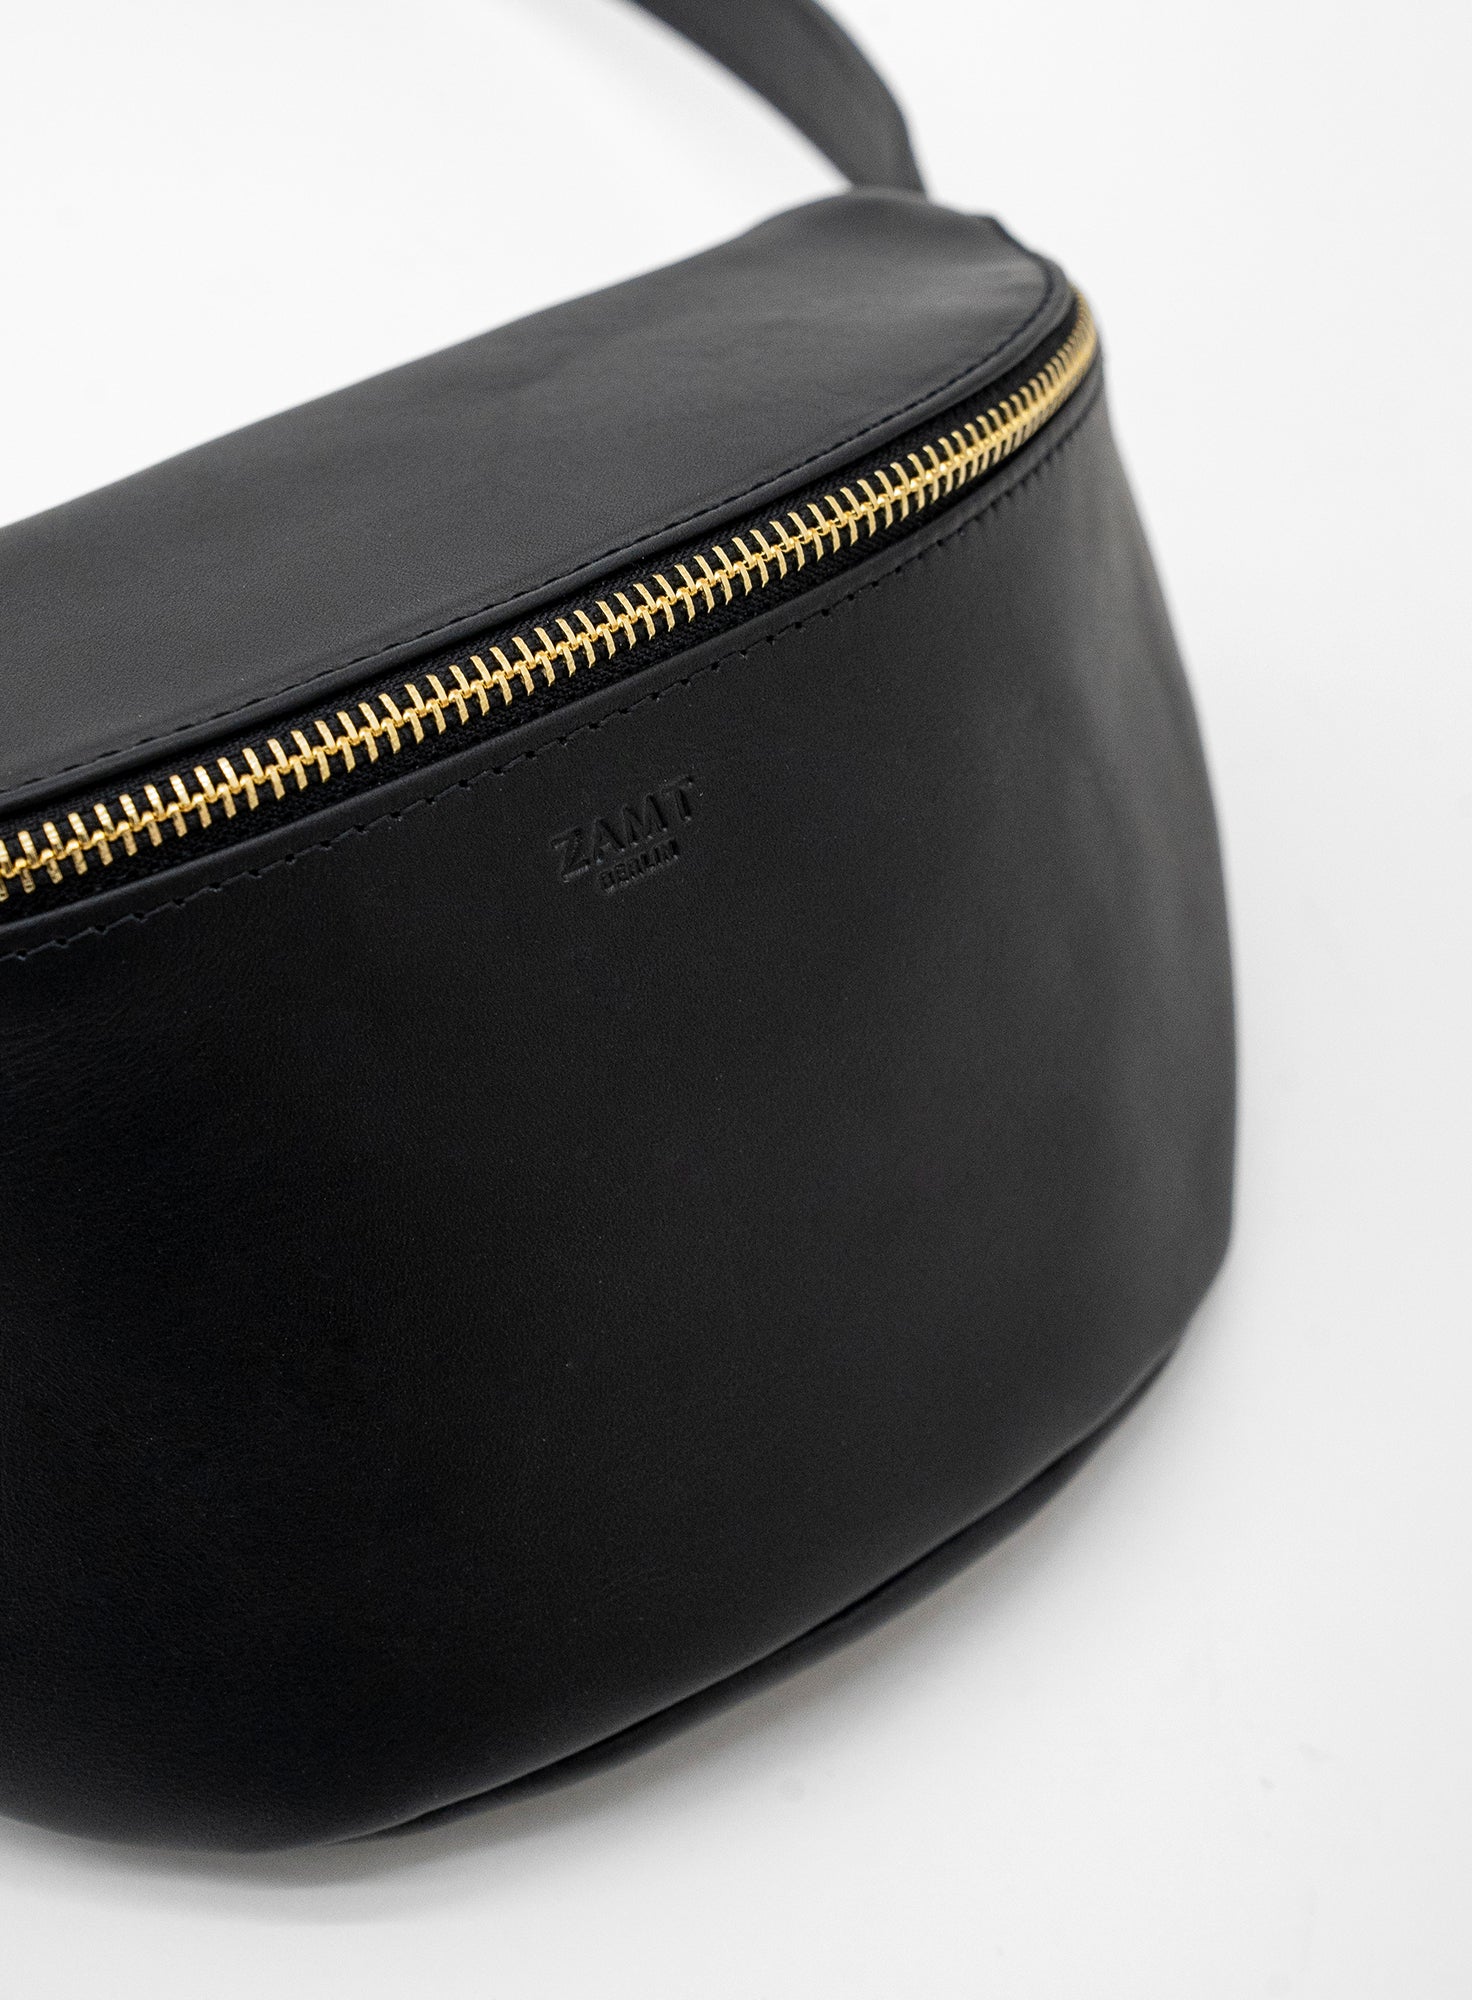 HIP_BAG_CAN_Black_Gold_Designed_in_Berlin_Made_to_last_Handmade_in_Poland.